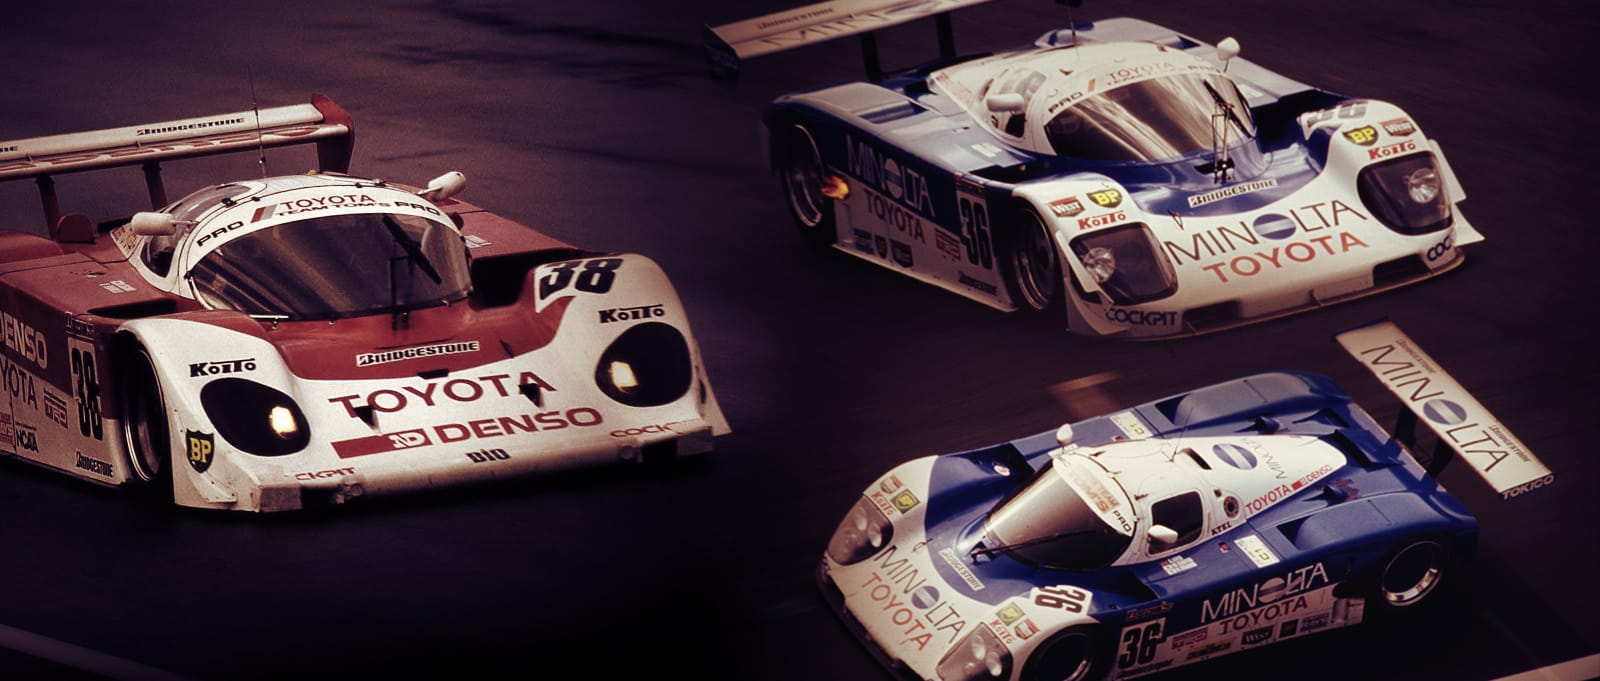 1989-1990 A Group C car is developed and gets best result yet of 6th place